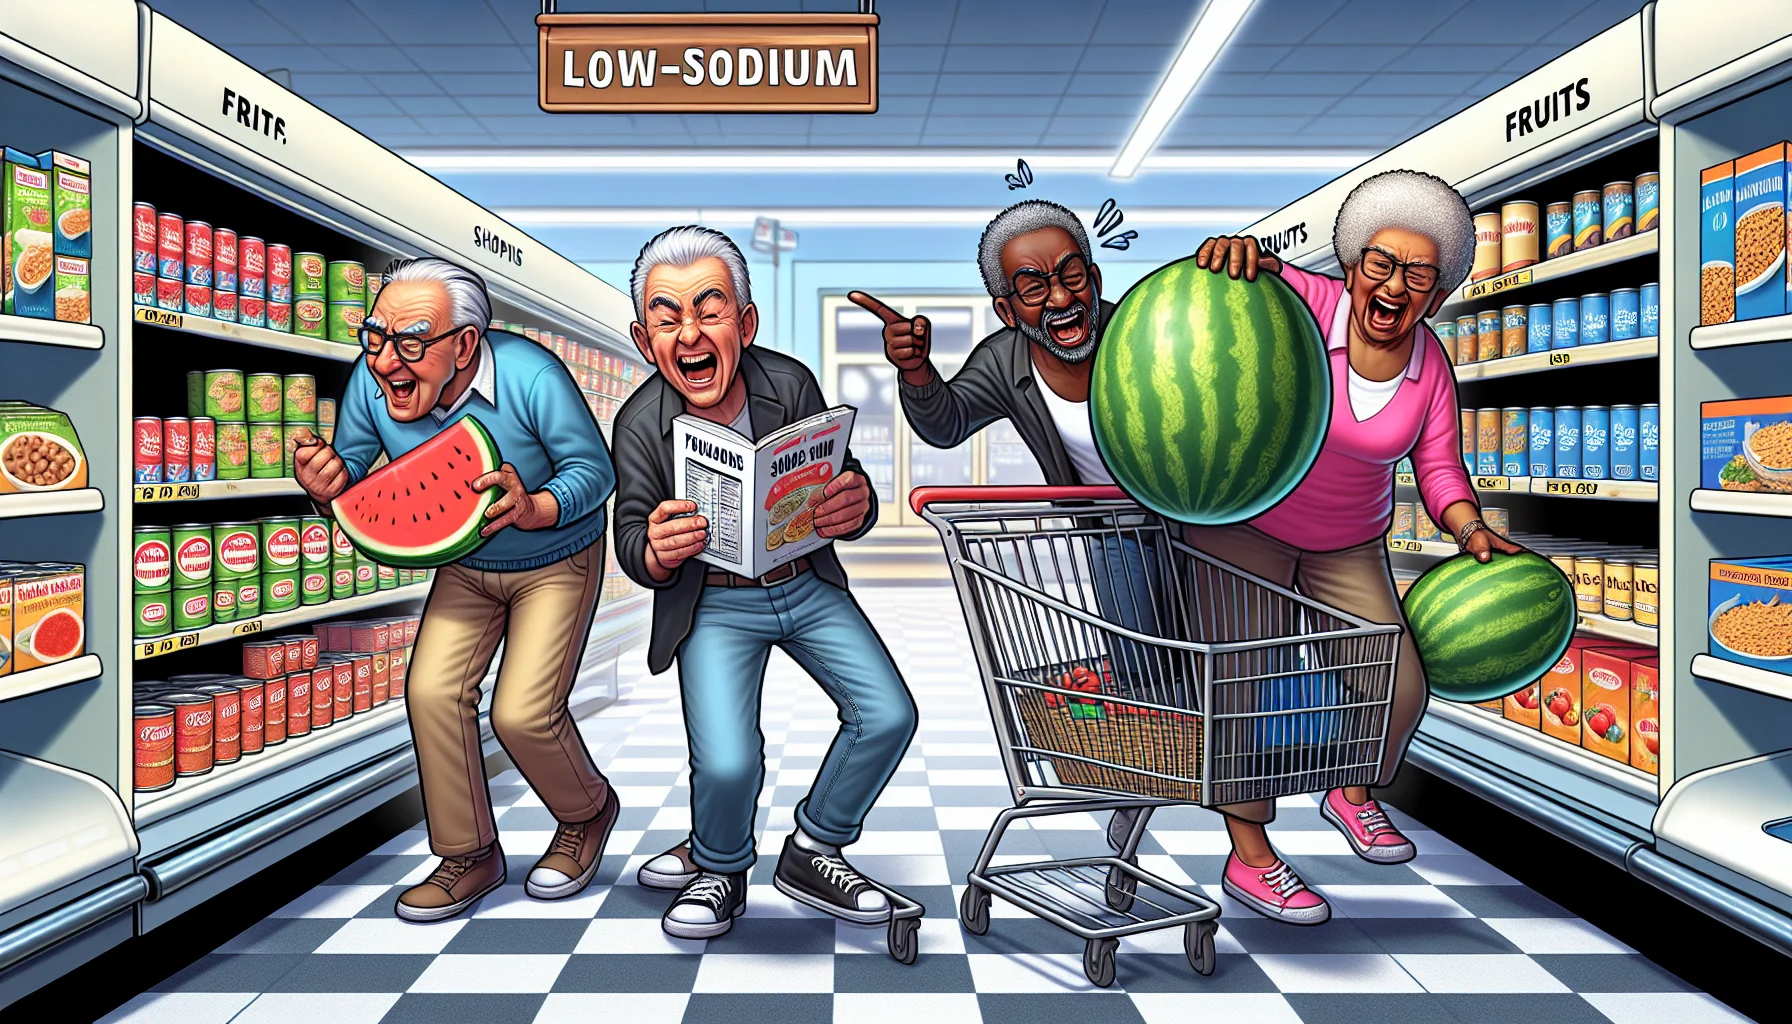 Imagine an amusing scenario taking place at a supermarket. A spirited elderly Caucasian man is scrutinizing labels on various cans in the low-sodium foods aisle, tending to his diet. Beside him, a lively elderly Hispanic woman is wrestling with a particularly hefty watermelon while comparing it to the 'fruits' section on her low-sodium shopping list. At the same time, an energetic elderly Black woman is having a laugh-filled debate with a determined elderly South Asian man over which brand of whole-grain cereal is healthier, both holding up their respective boxes. A humorous emphasis on the challenges and joys of maintaining a low-sodium diet in old age is prominent.